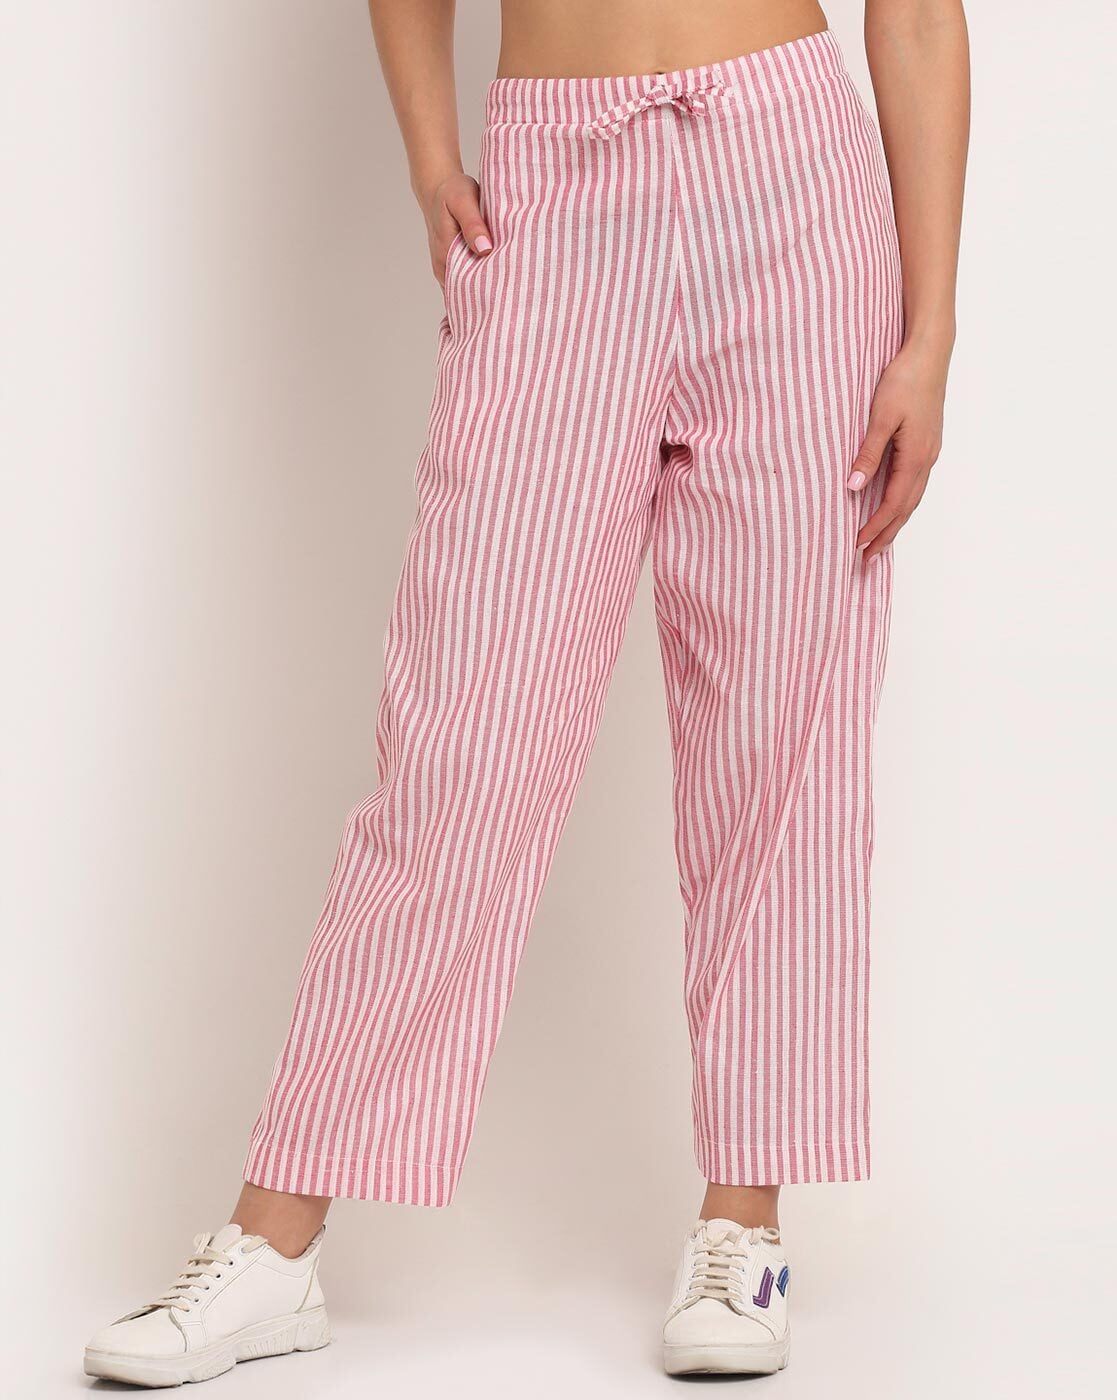 Go Colors Women Stripe Grey Printed Pencil Pant S S Buy Go Colors Women  Stripe Grey Printed Pencil Pant S S Online at Best Price in India   Nykaa